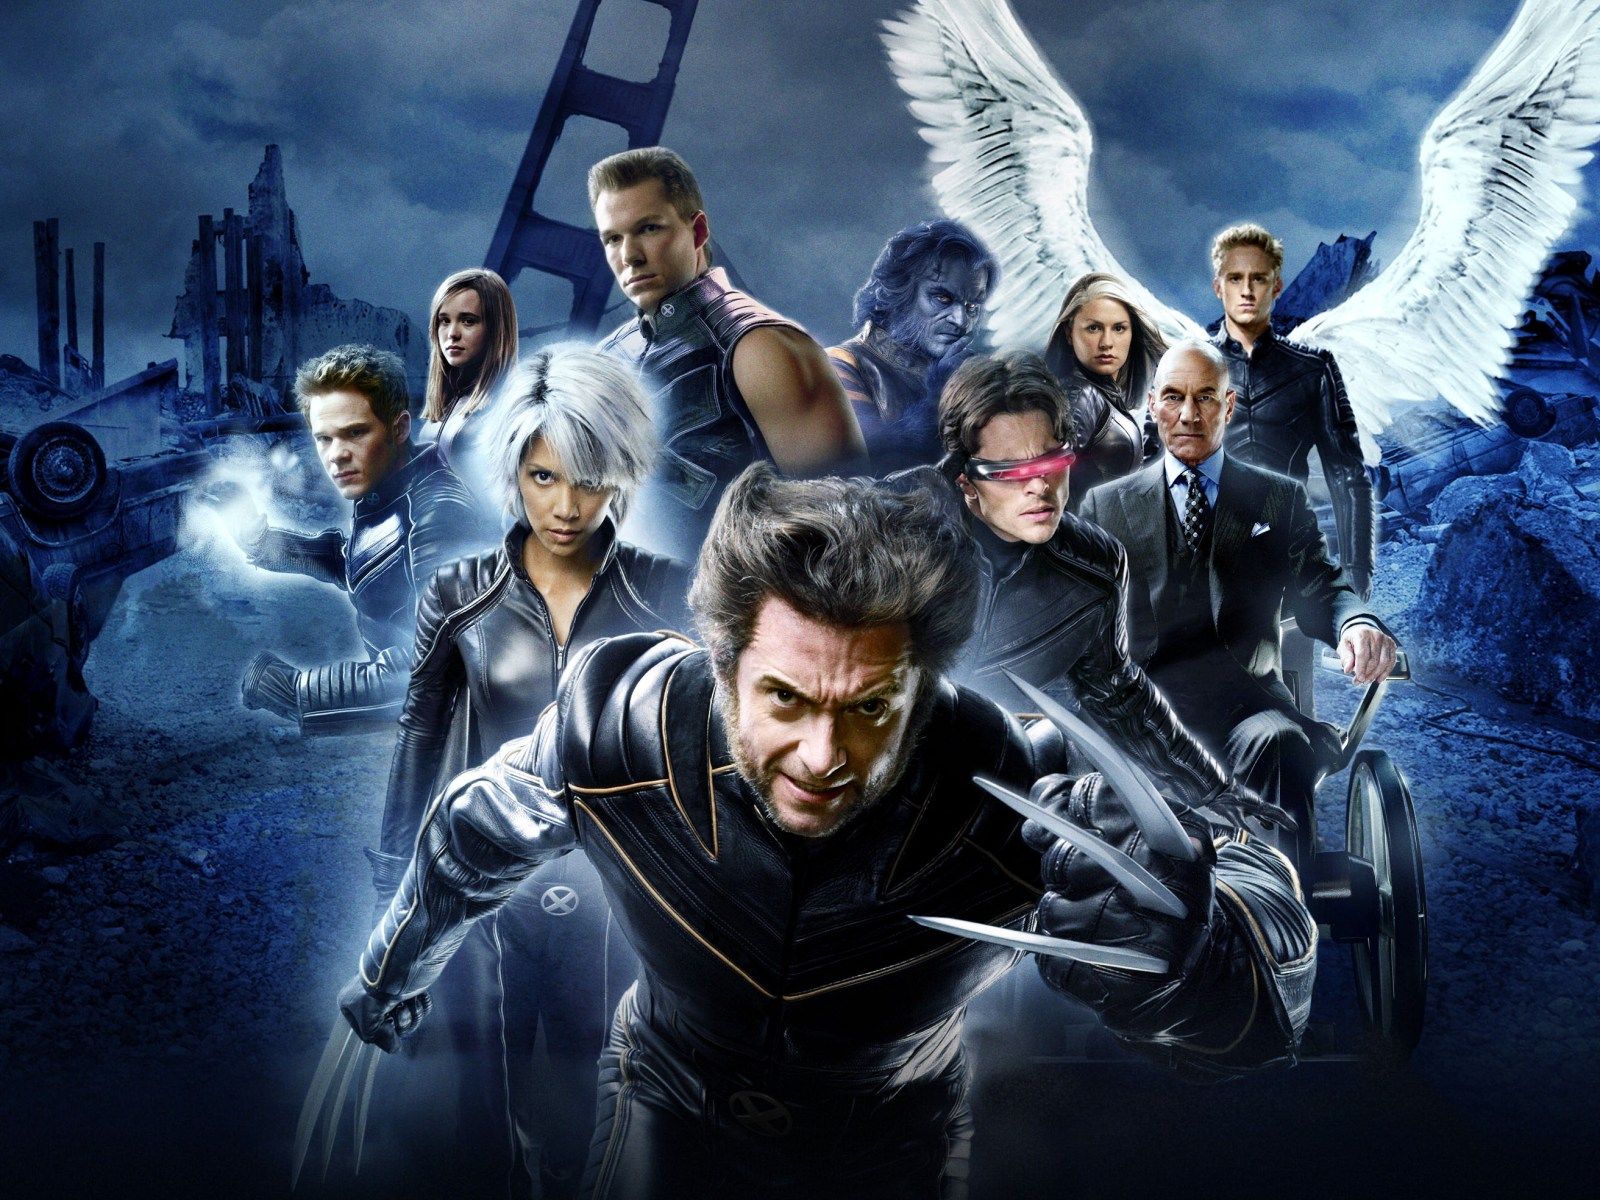 X Men The Last Stand wallpapers and images - wallpapers, pictures